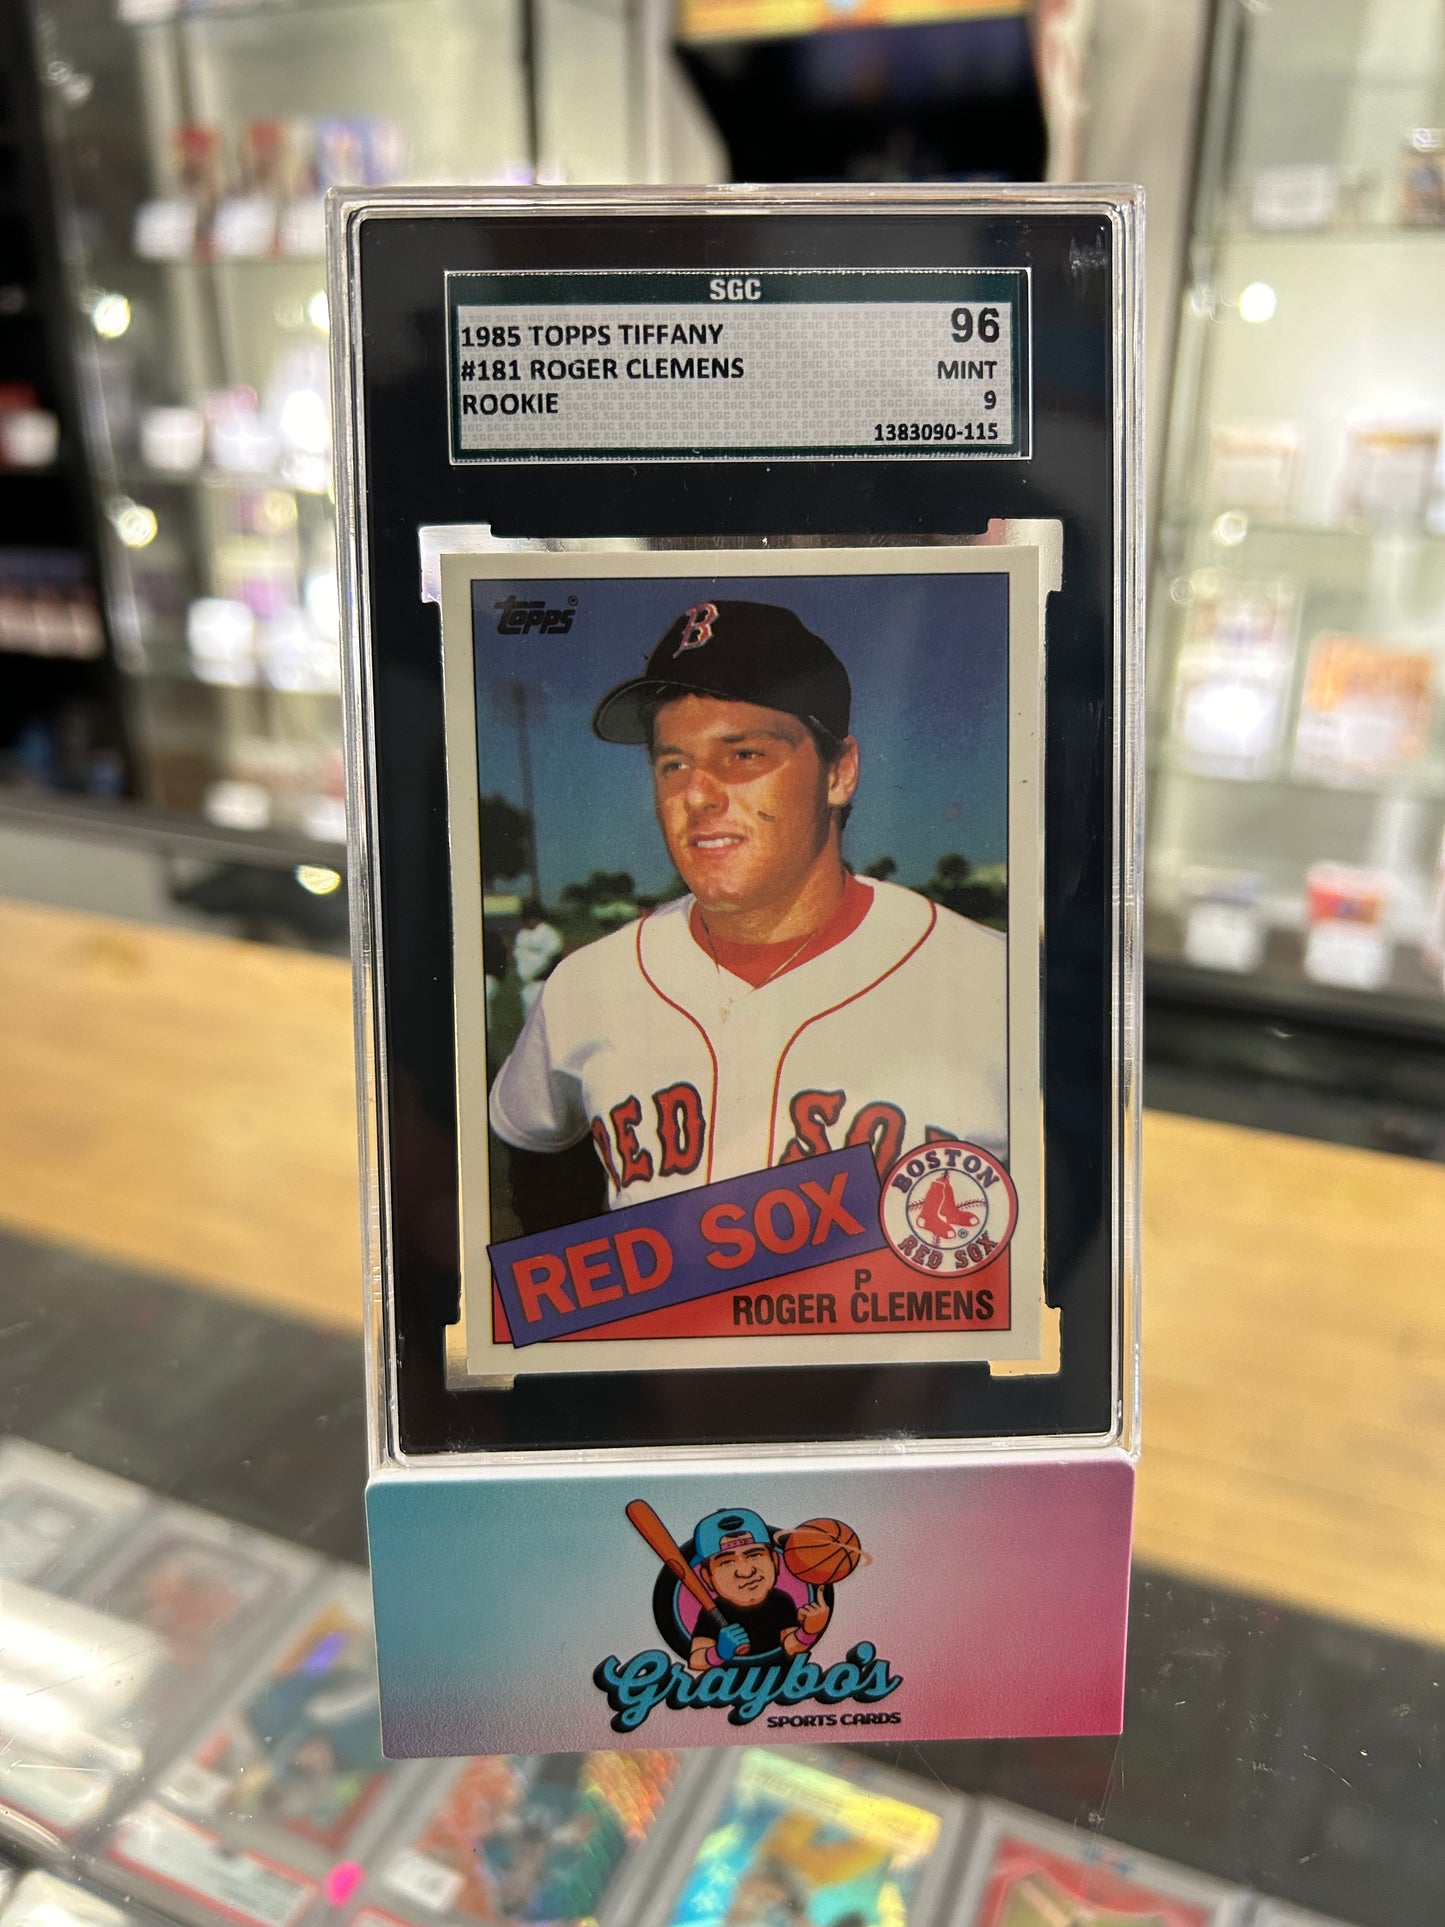 1985 Topps Tiffany Roger Clemens Rookie #181 SGC 9 (96)